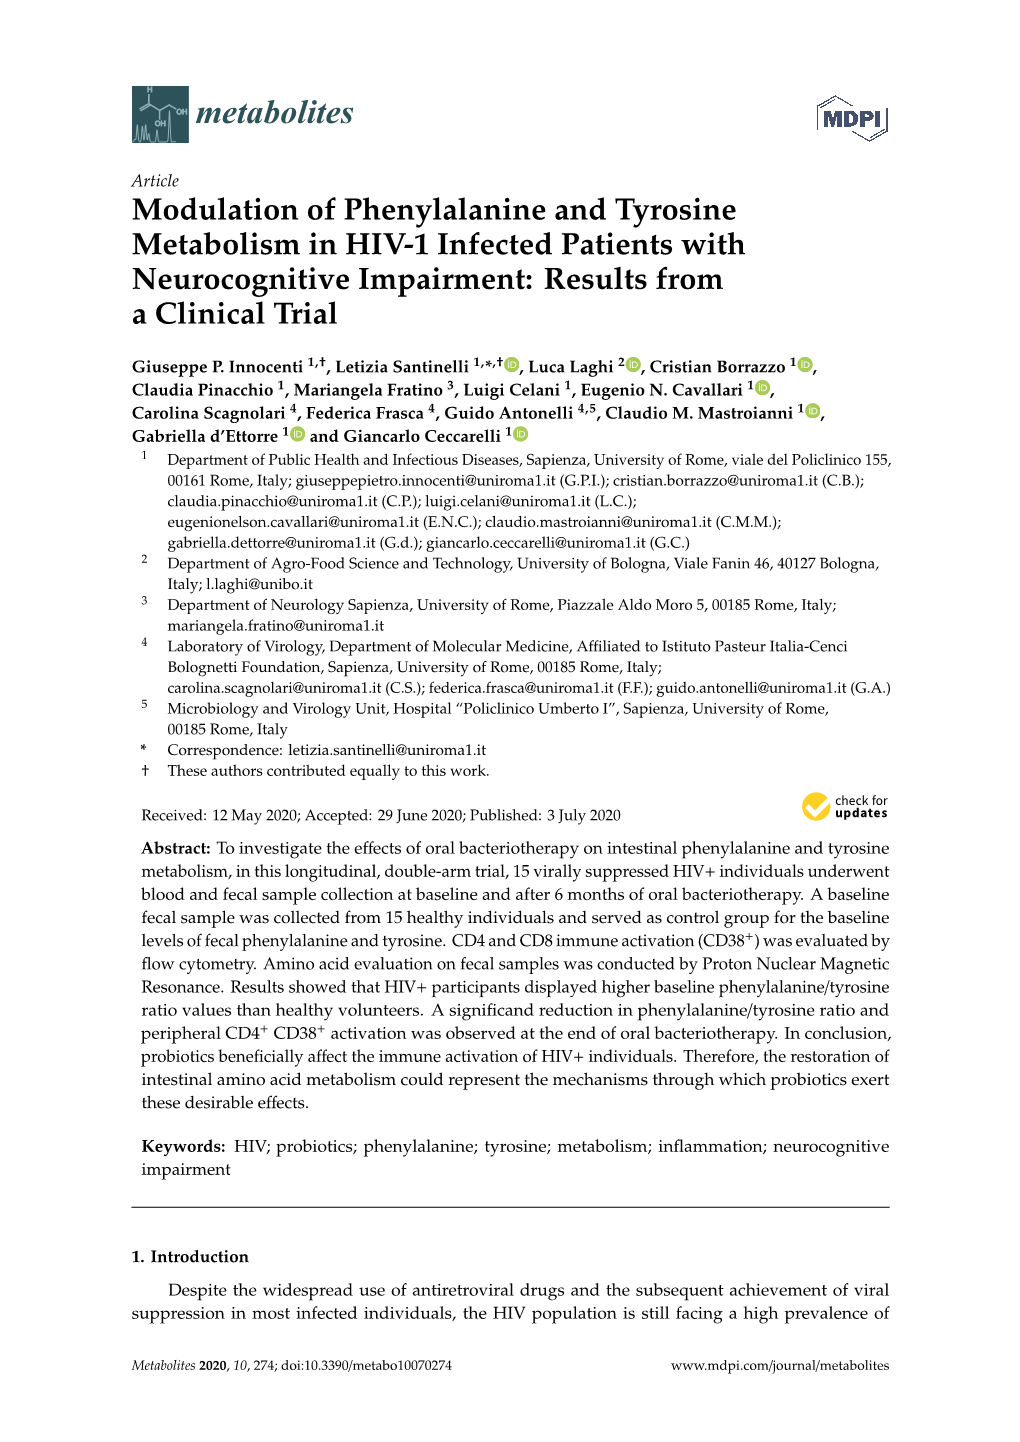 Modulation of Phenylalanine and Tyrosine Metabolism in HIV-1 Infected Patients with Neurocognitive Impairment: Results from a Clinical Trial